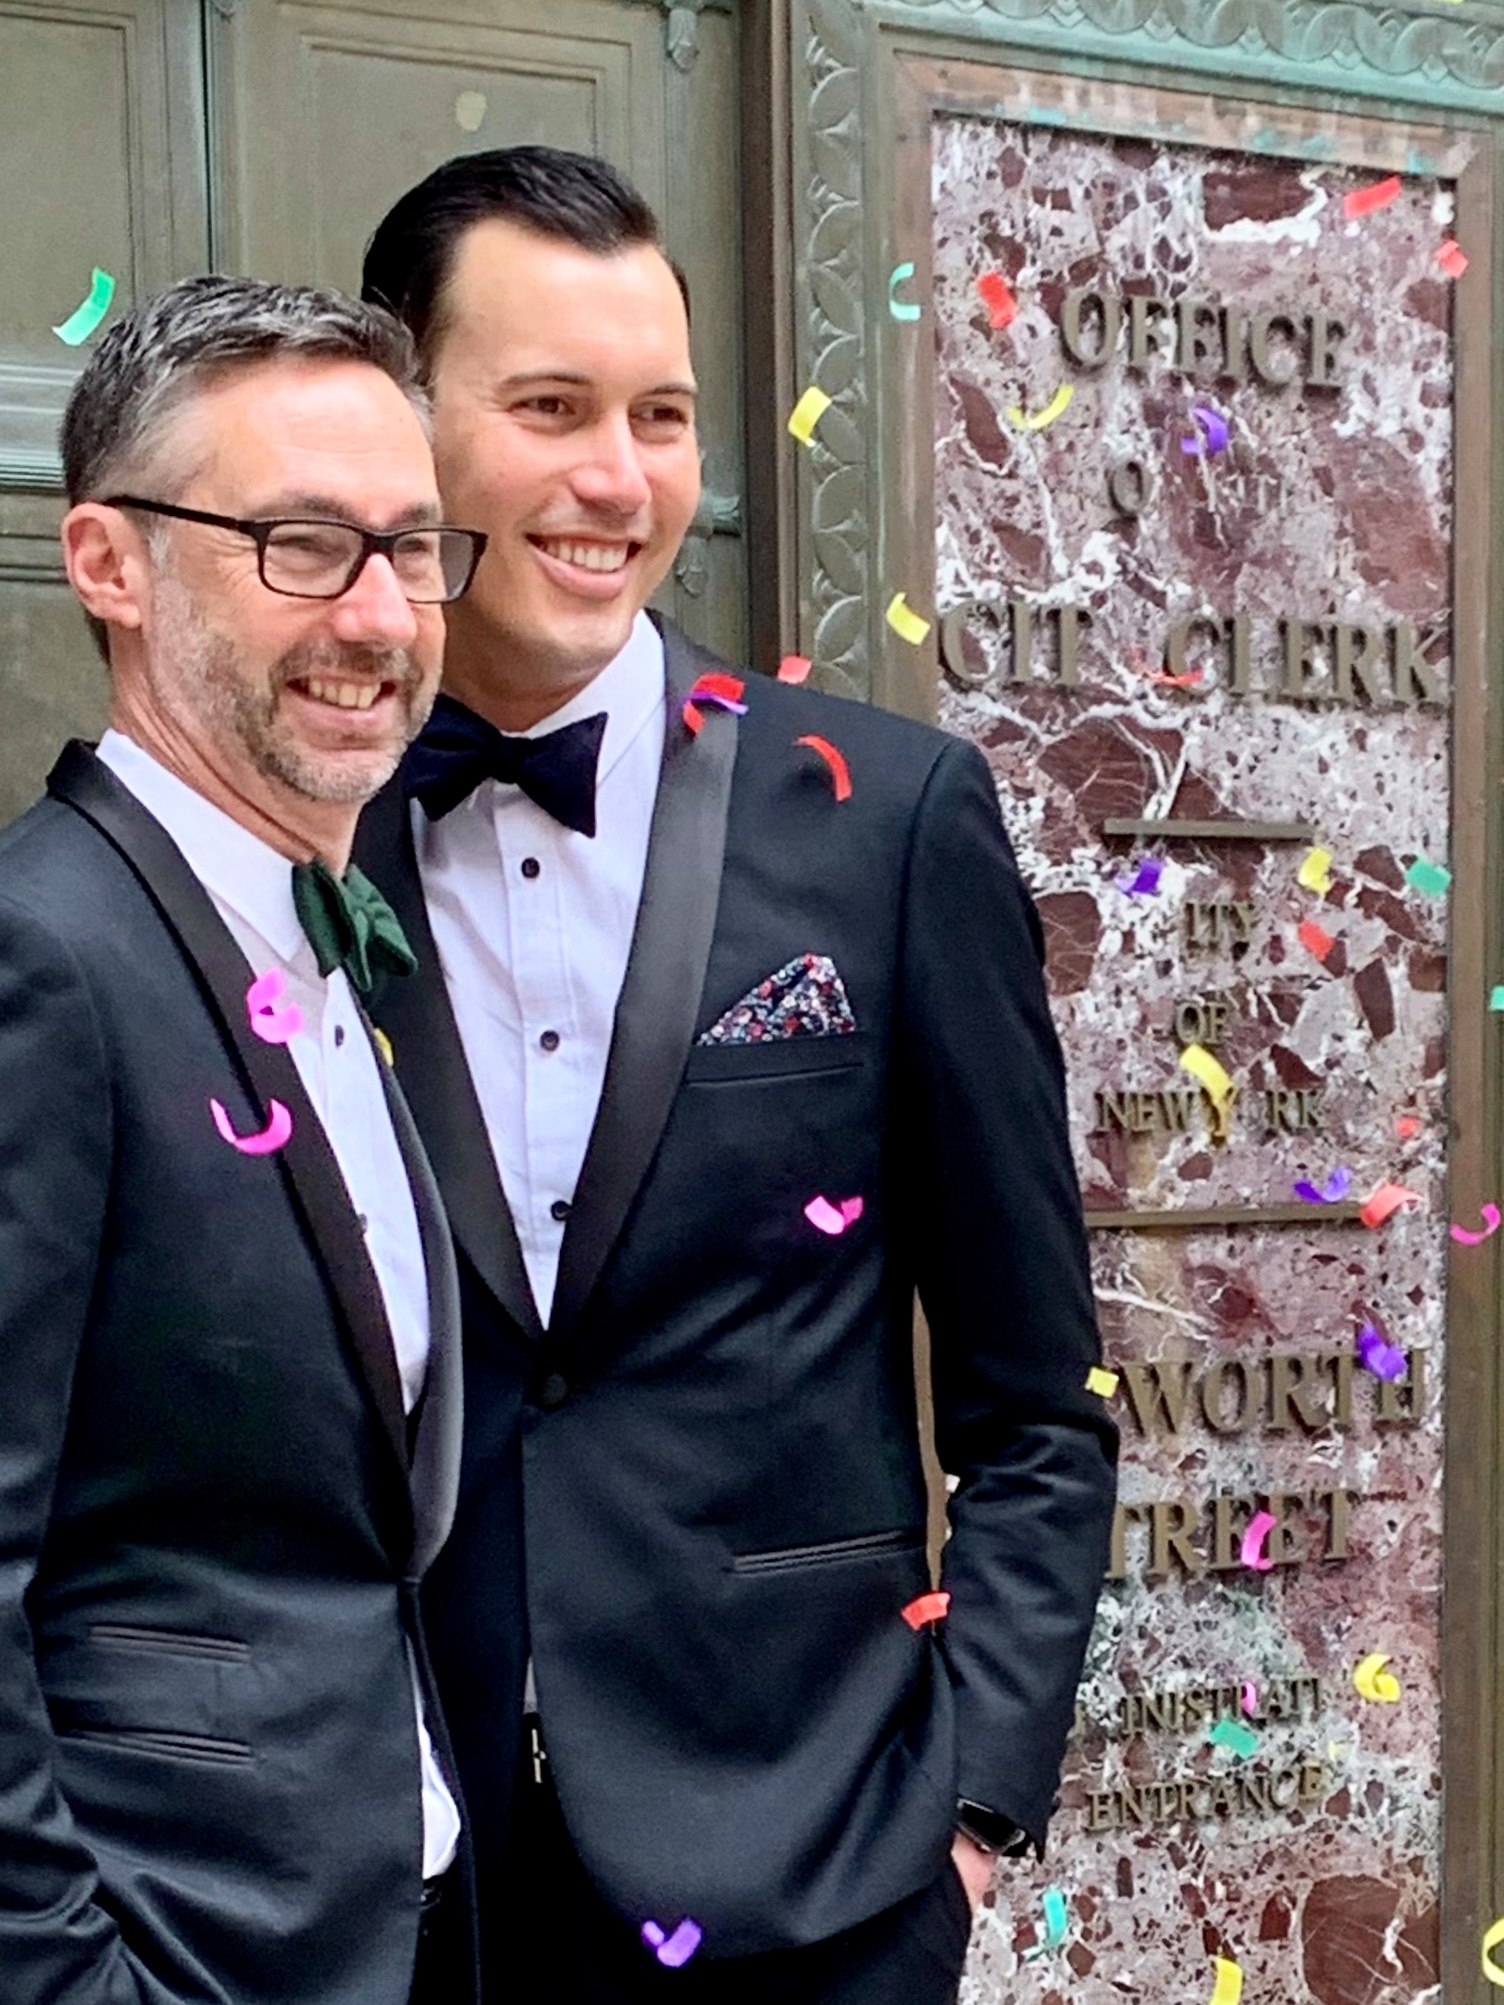 Just married! Congratulations to the newlyweds who tied the knot in New York l...